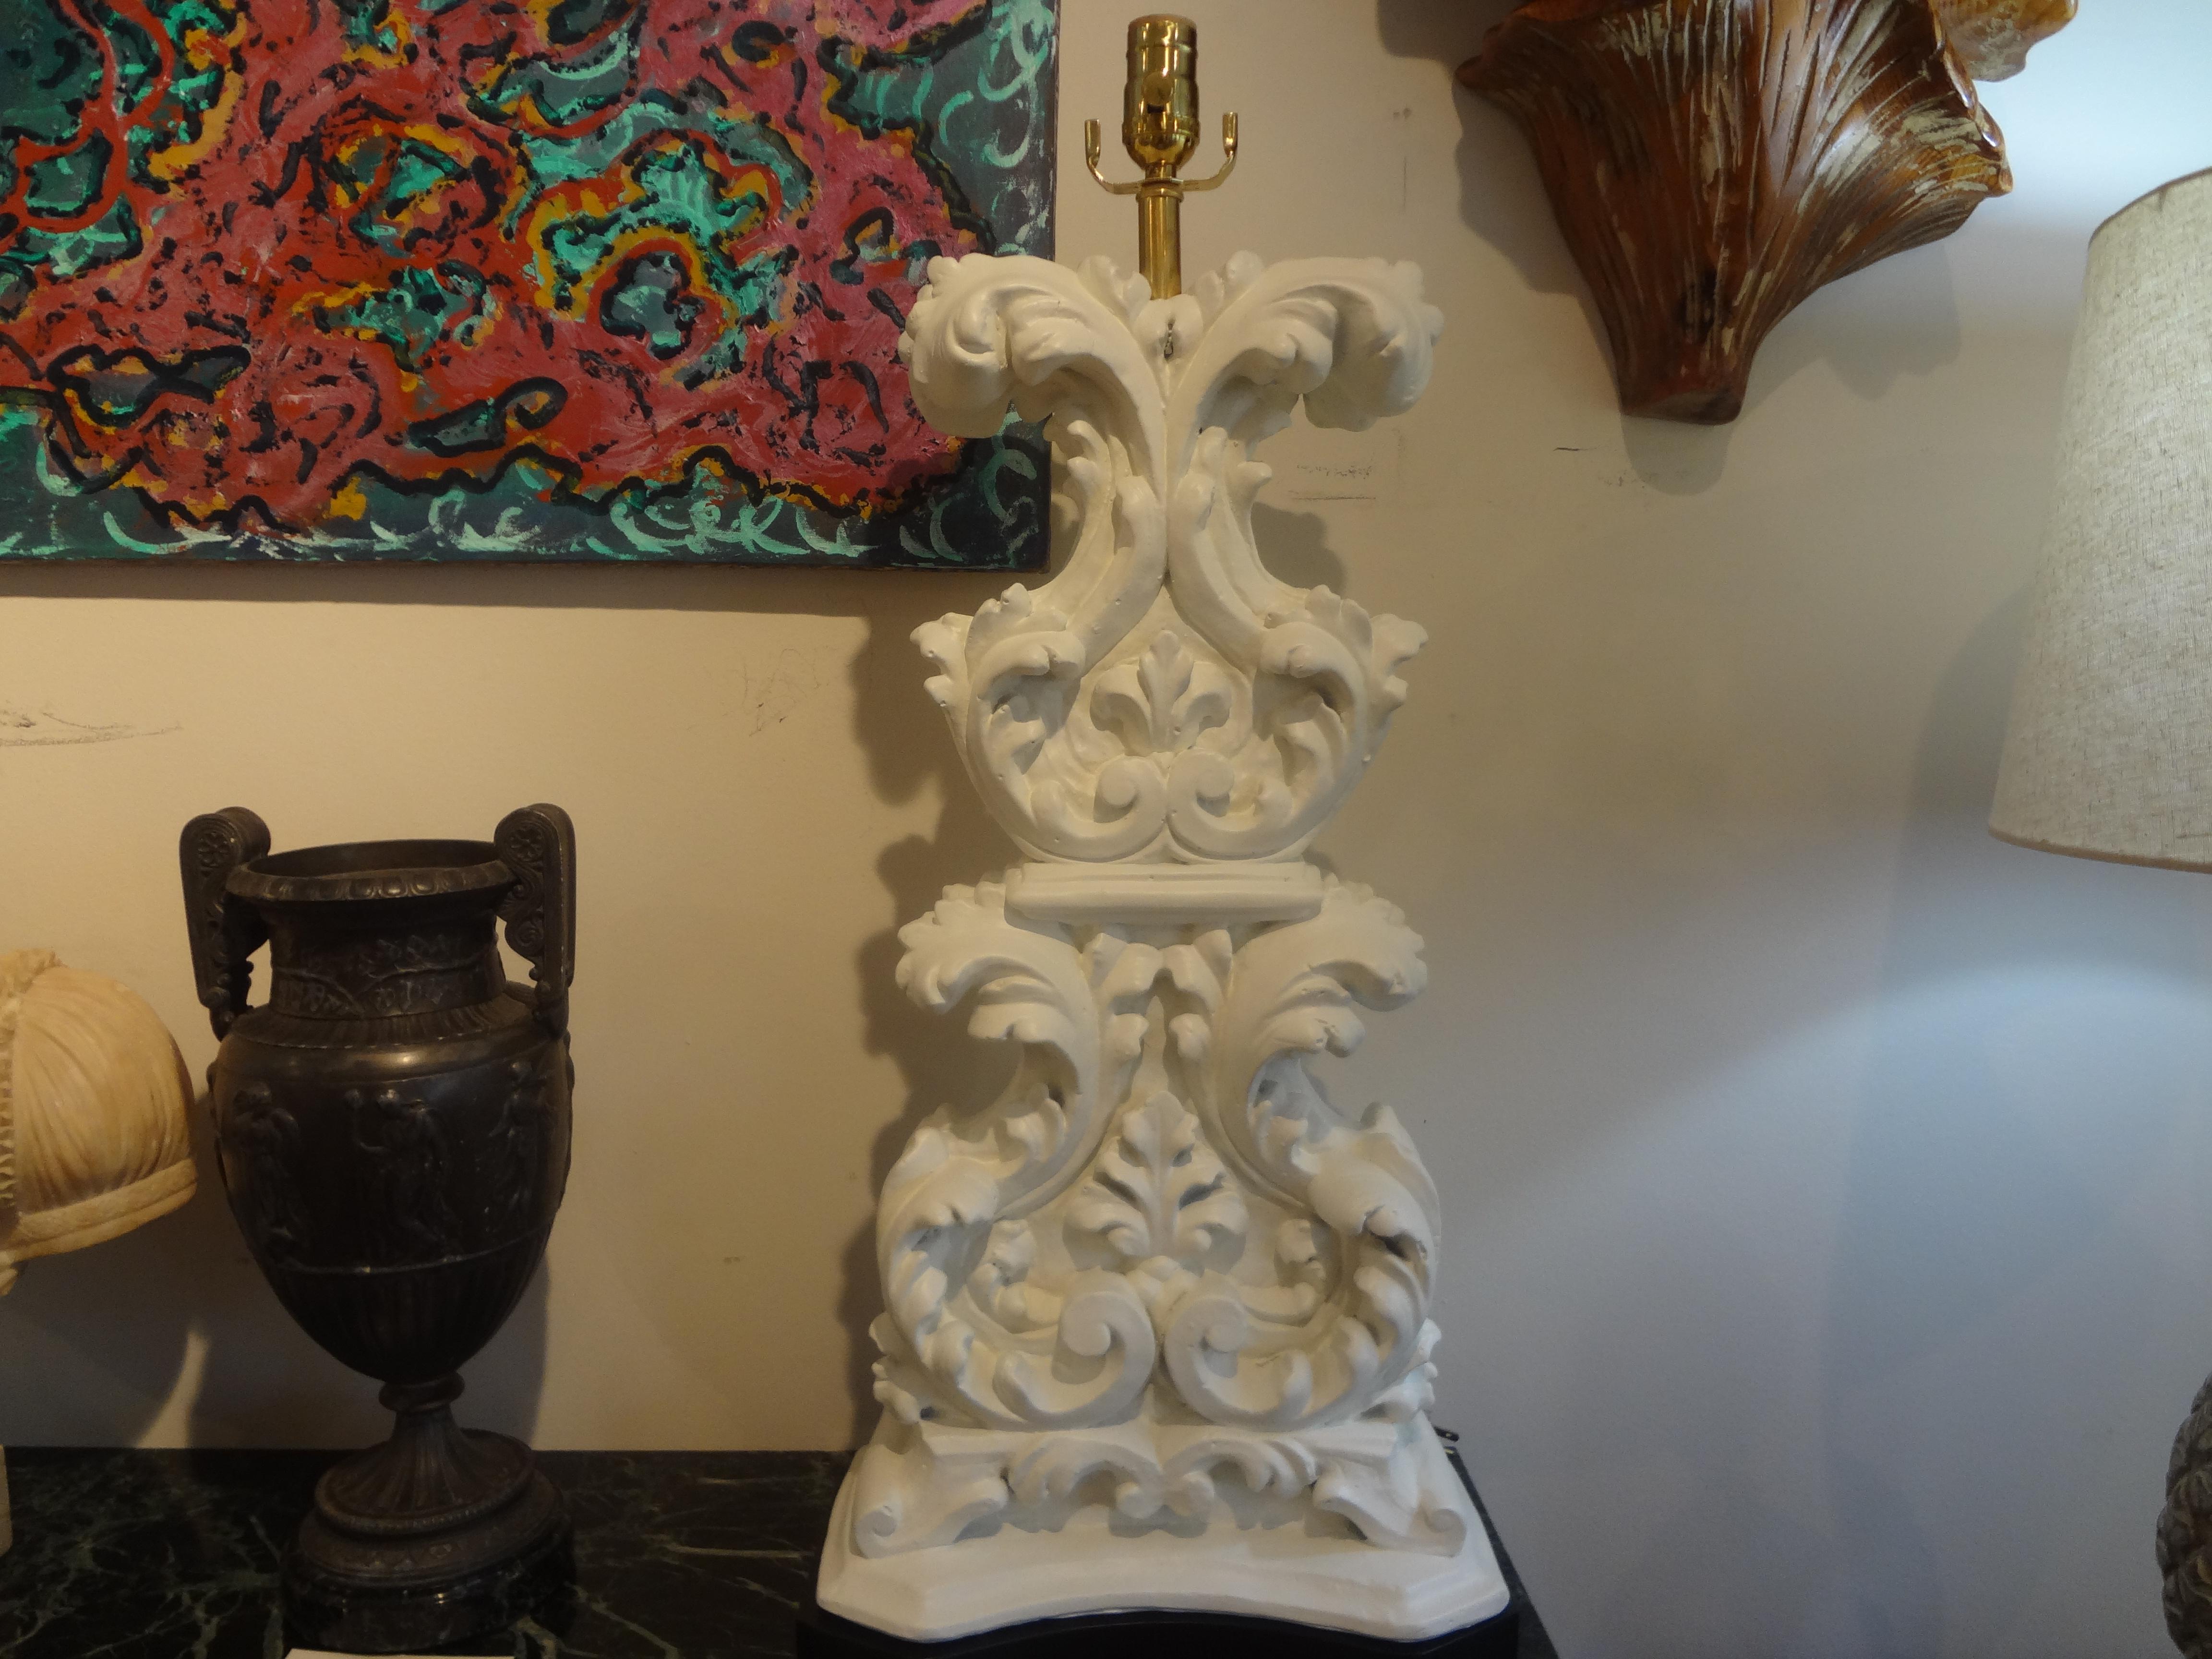 Pair of Hollywood Regency Dorothy Draper plaster lamps. Our stunning large scale heavy weight Hollywood Regency Baroque style plaster lamps on wood bases were executed in a cream white lacquer finish. These mid-century plaster lamps are newly wired